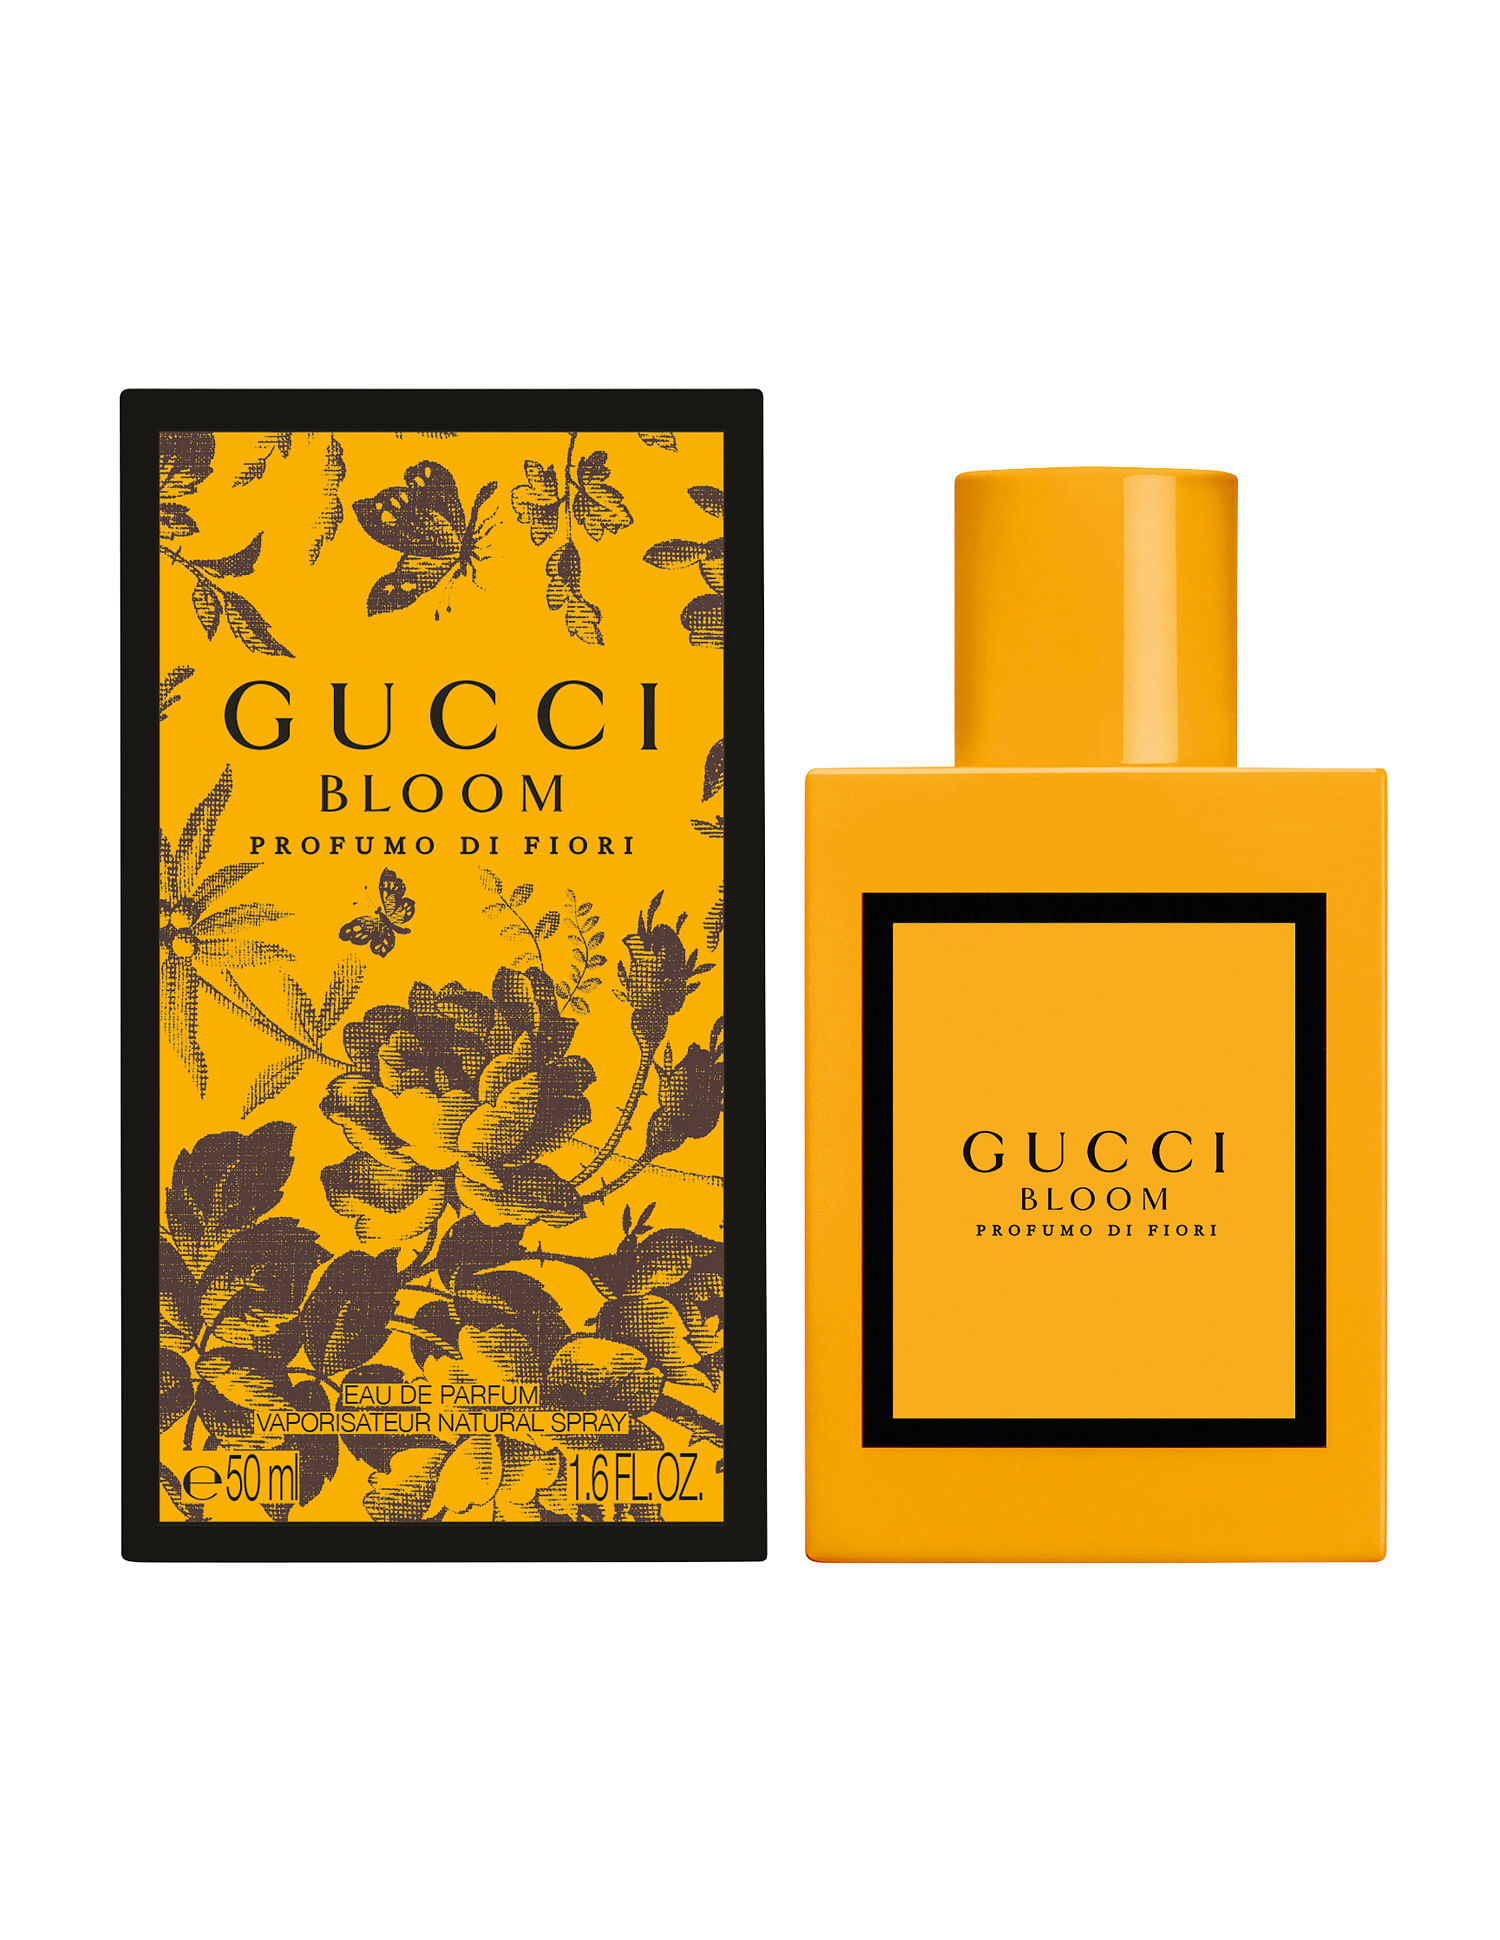 Gucci Free pouch with large spray purchase from the Gucci Bloom